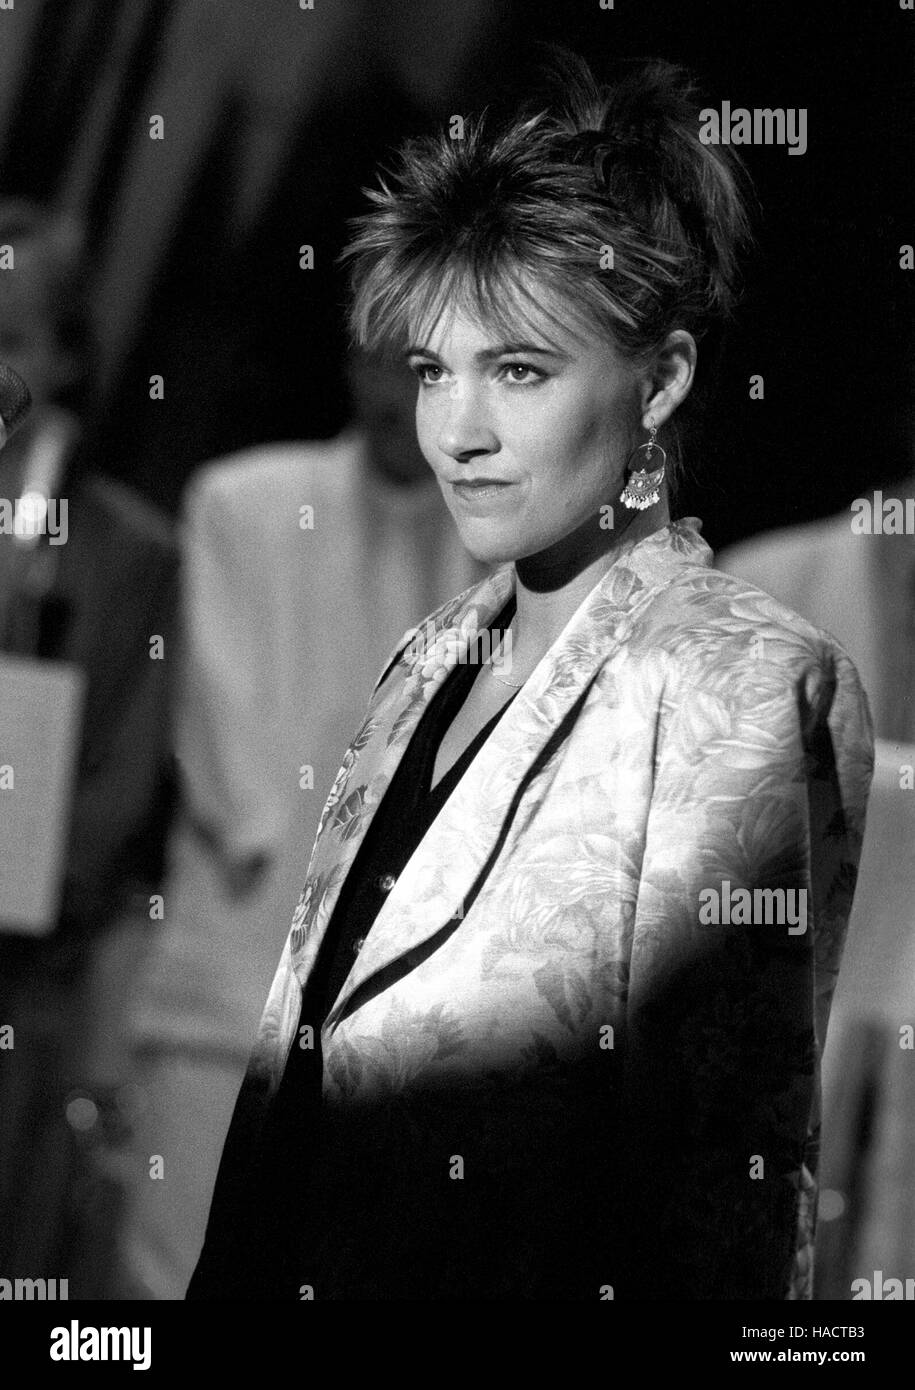 MARIE FREDRIKSSON singer 1986 later she became member of Roxette together with Per Gessle Stock Photo